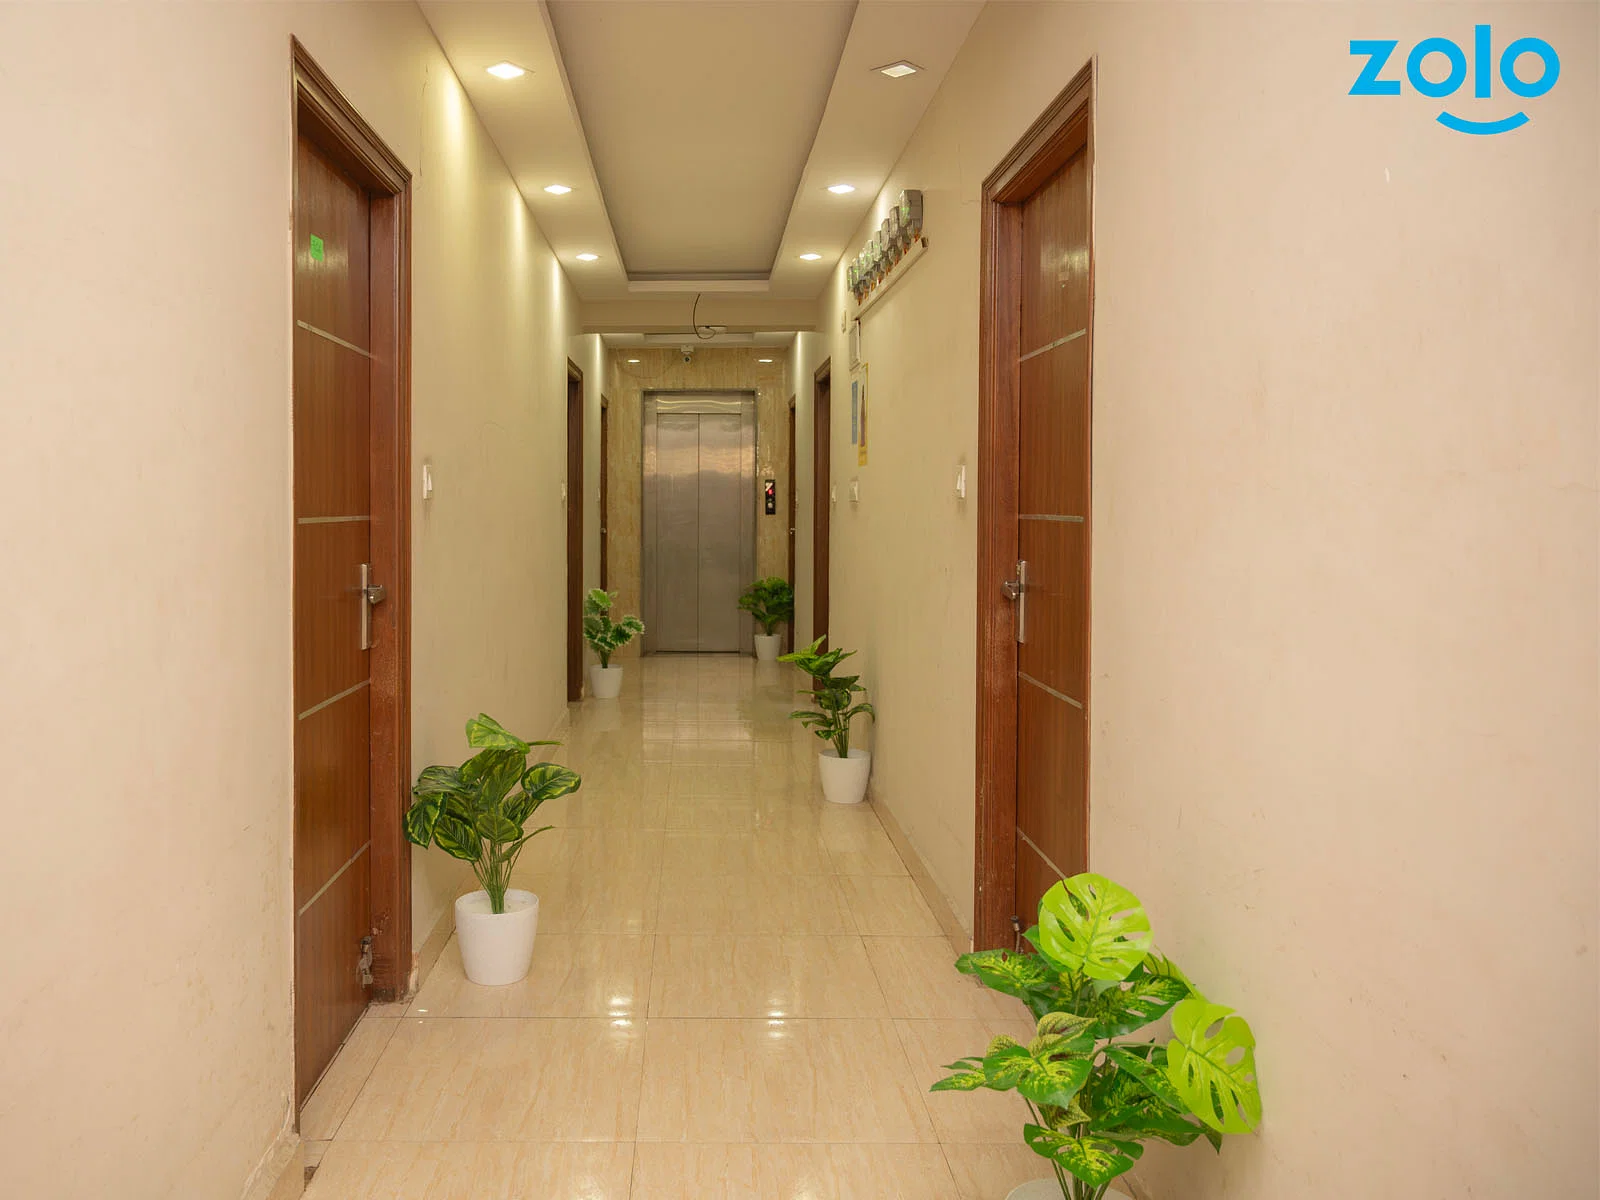 budget-friendly PGs and hostels for unisex with single rooms with daily hopusekeeping-Zolo Maple